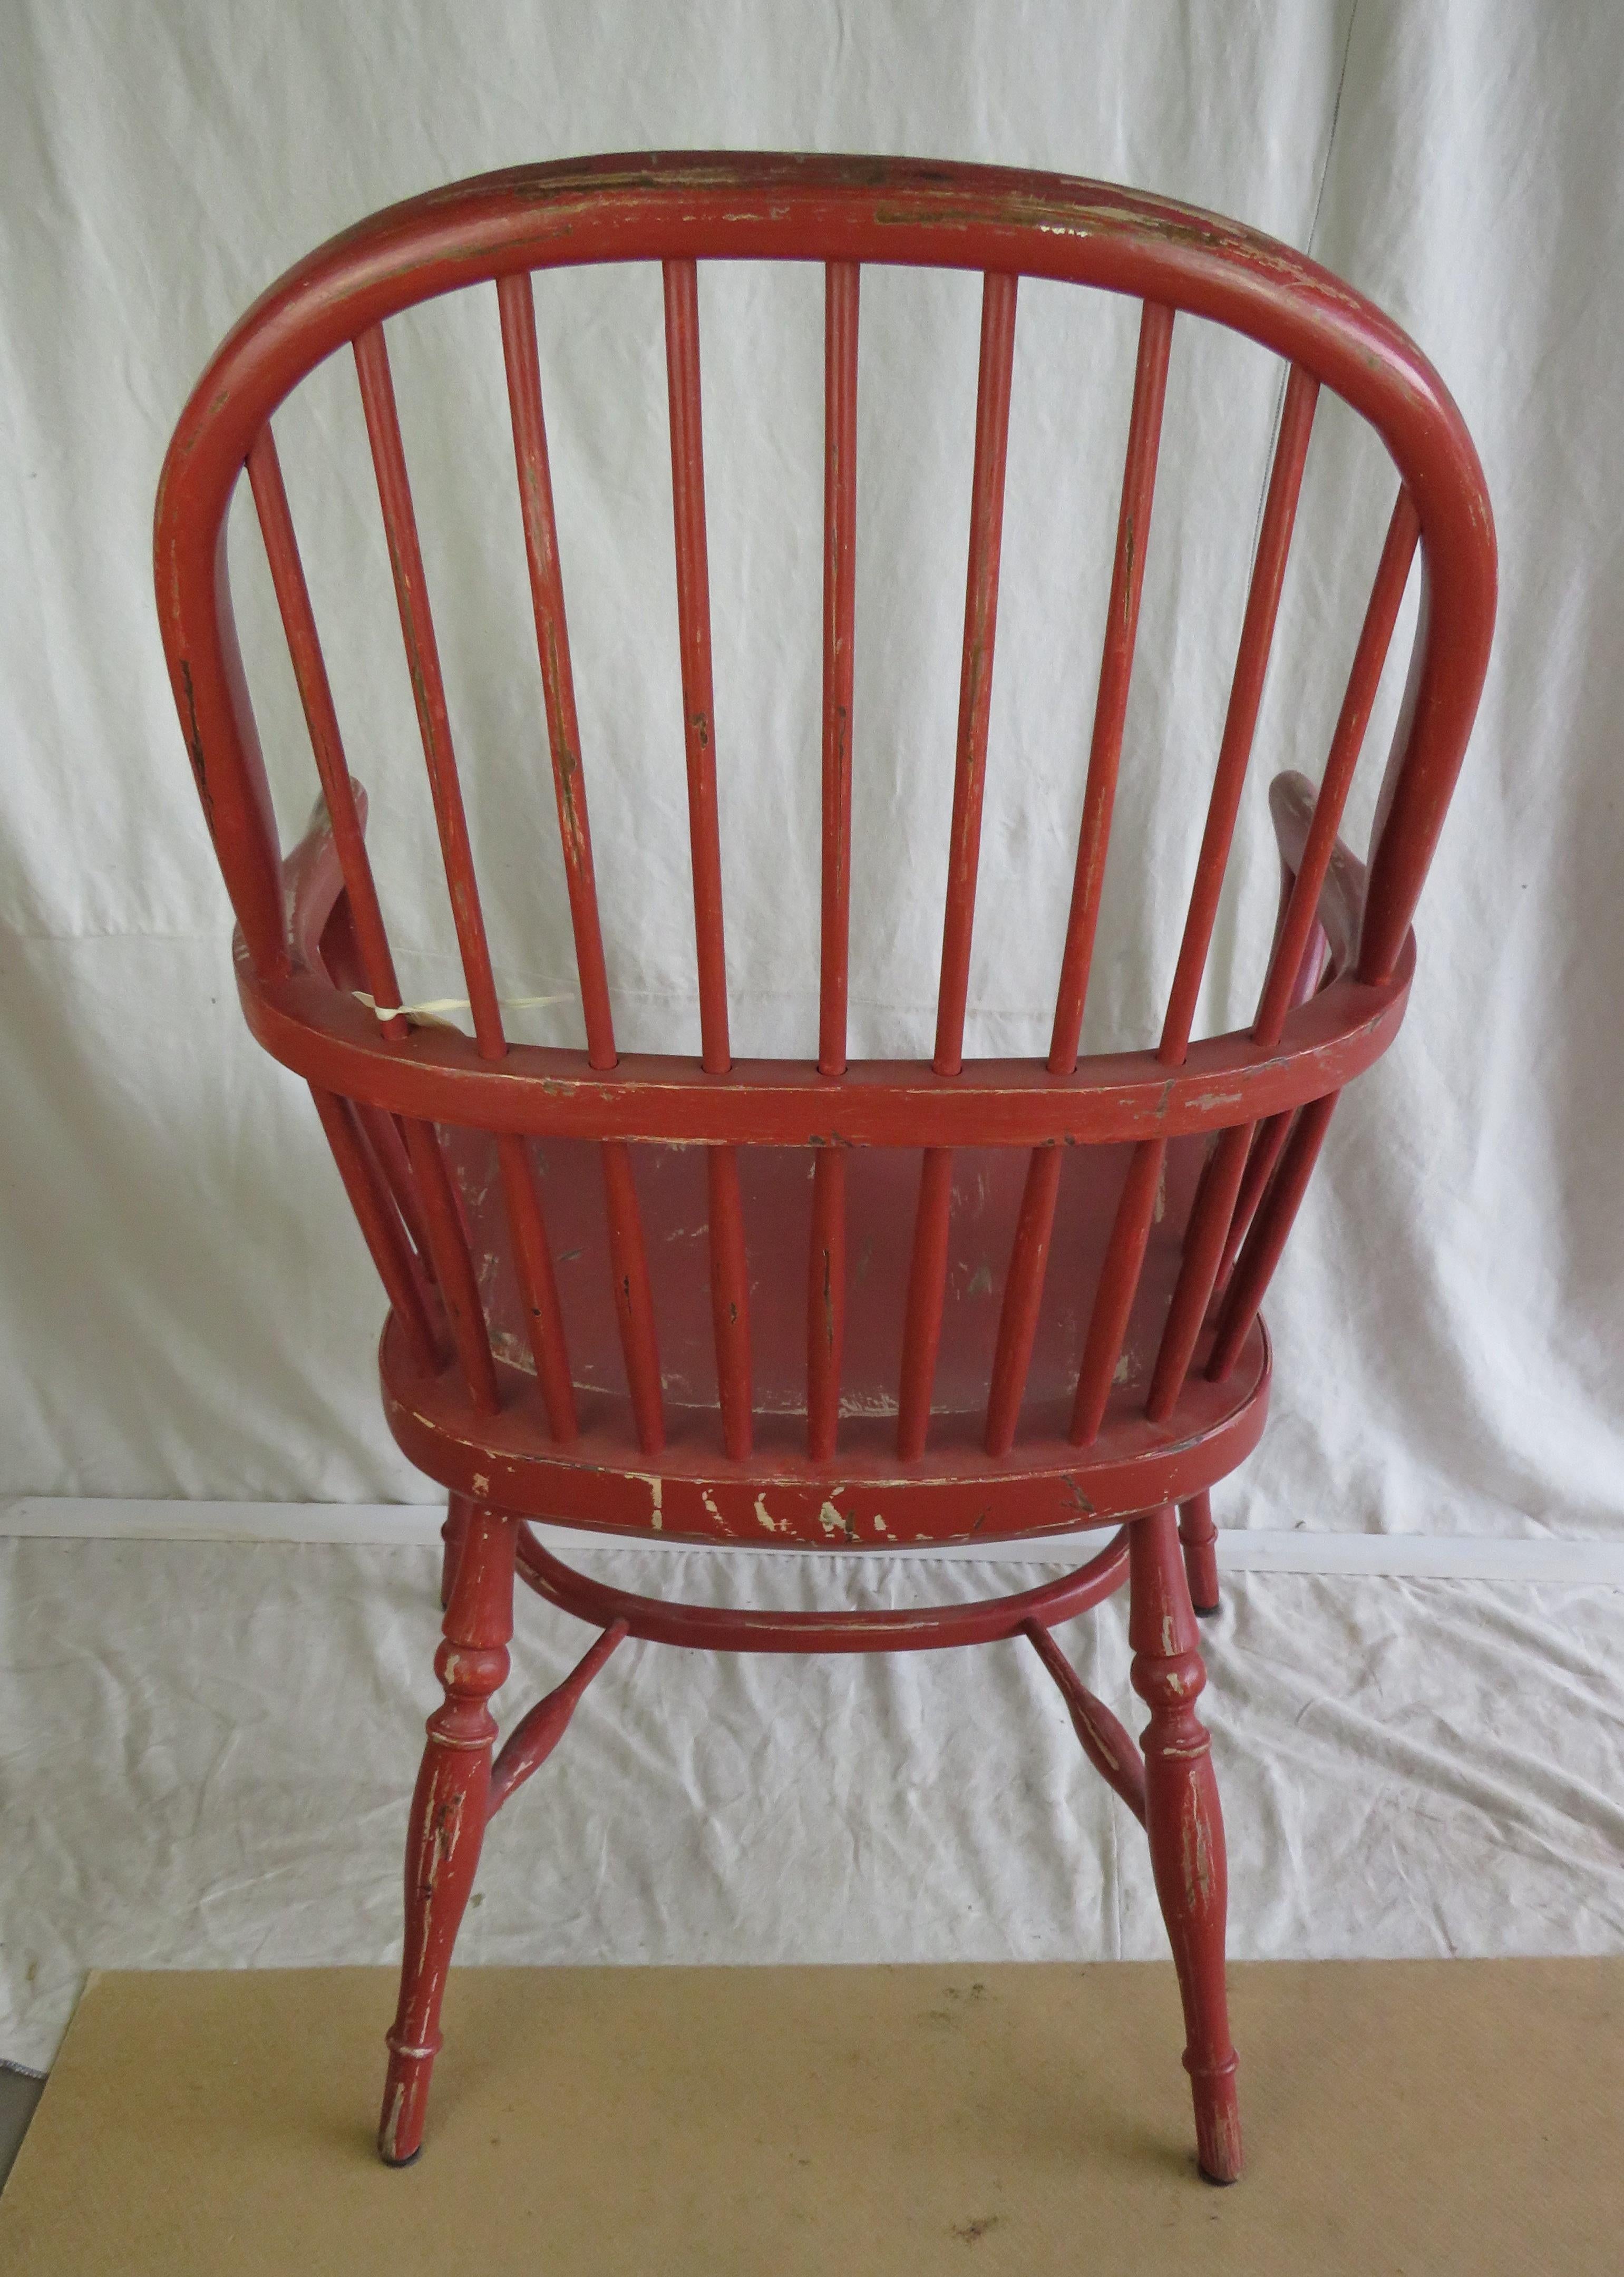 English reproduction of a stick back armchair in distressed red paint finish.